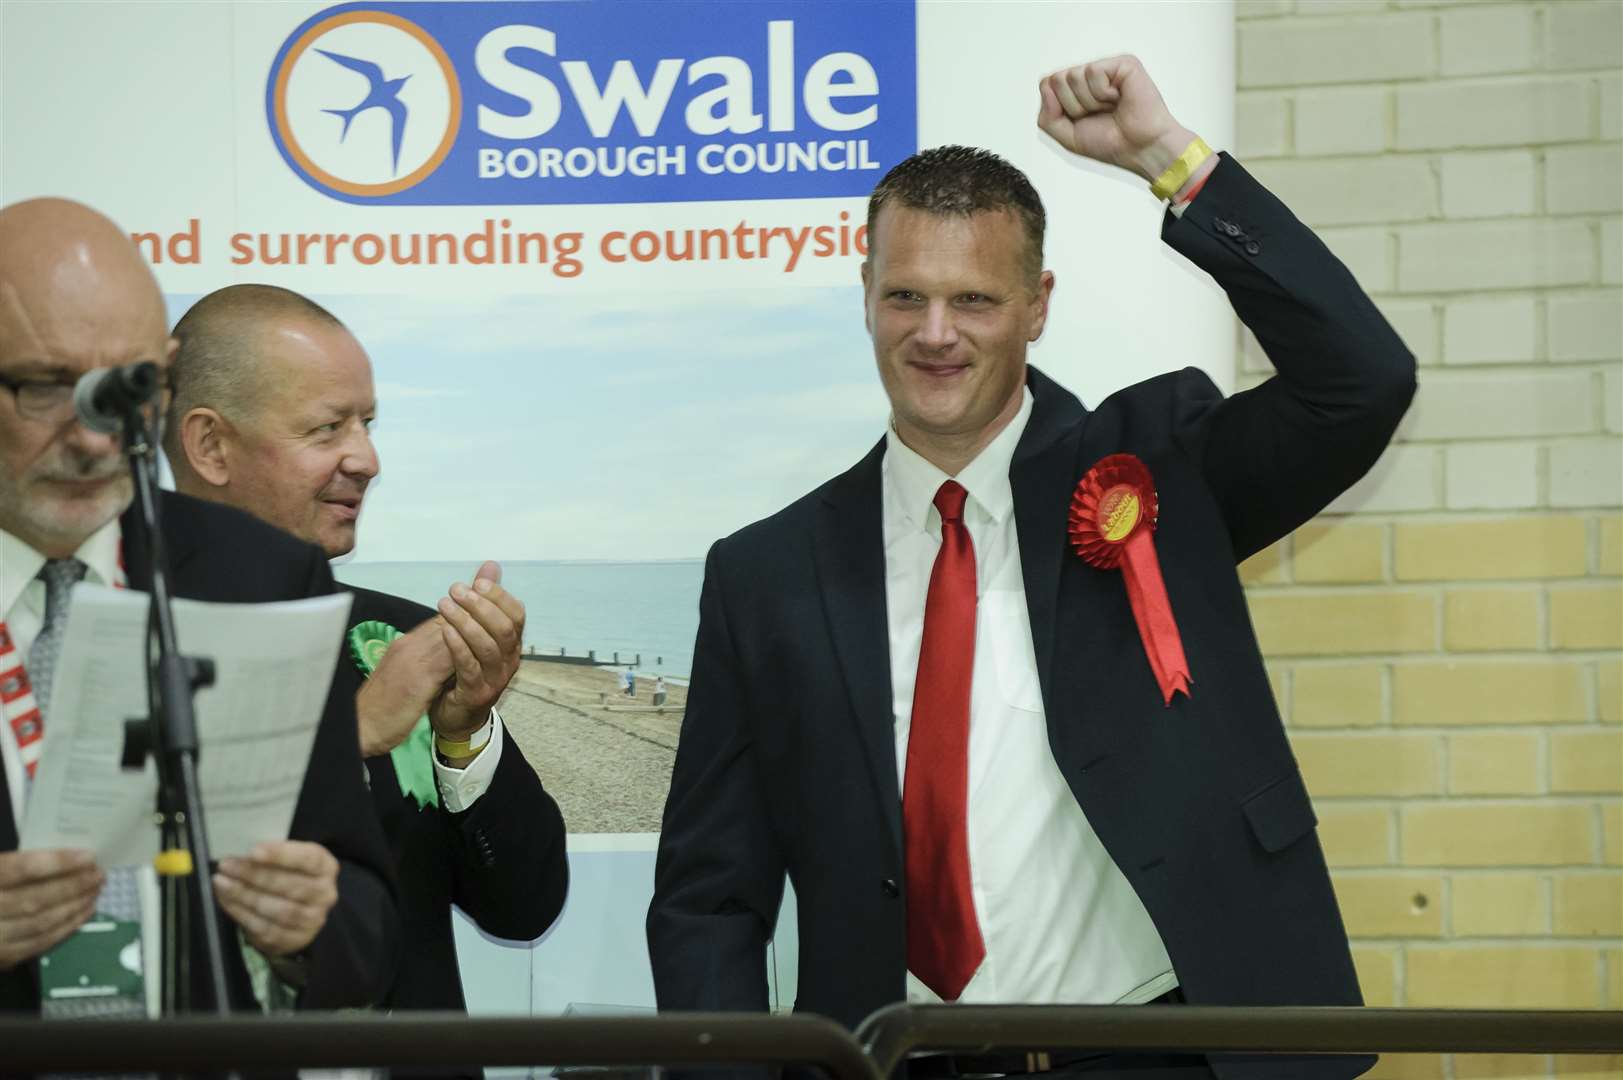 Mike Rolfe (Lab) raises his hand to supporters as Labour comes in second place in Sittingbourne and Sheppey.The Sittingbourne and Sheppey constituency count for the 2017 General Election, at the Swallows Leisure Centre, SittingbournePicture: Andy Payton FM4804171 (15547554)